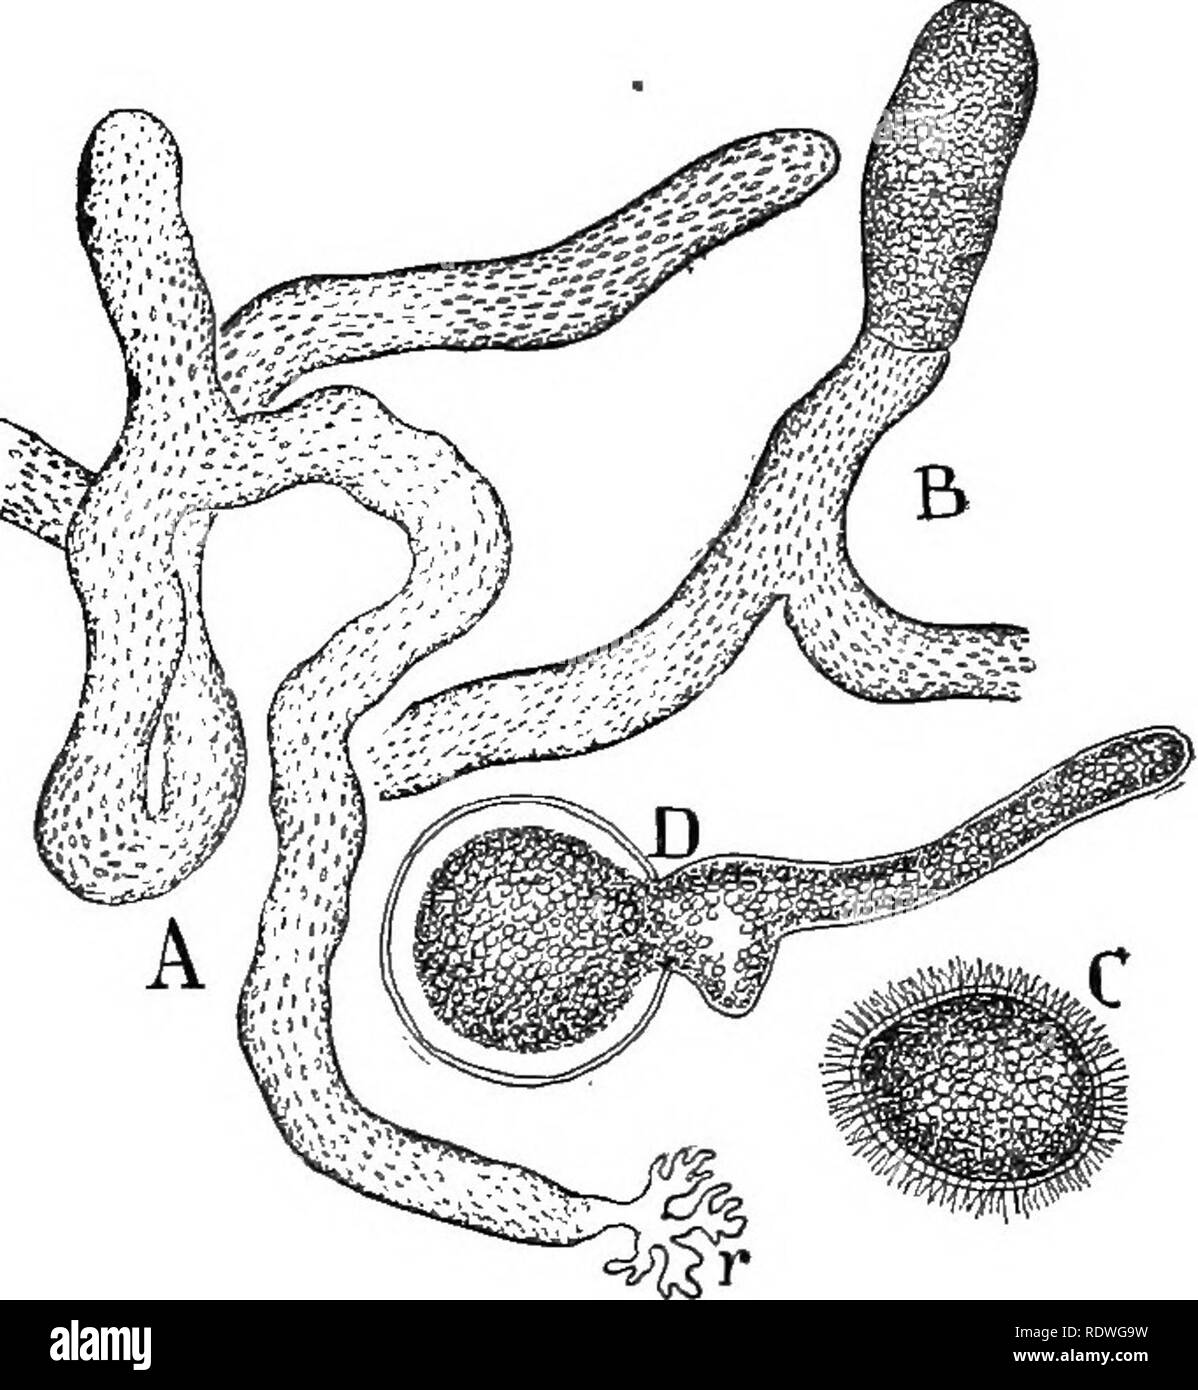 . Nature and development of plants. Botany. DEVELOPMENT OF PLANTS 195 70. Order d. Siphonales or Tubular Green Algae.—^This order includes a large number of odd forms that are filamentous in character and they differ from algae previously noted in that the filaments contain numerous nuclei, but with rare exceptions no cell partitions. Such plants are called coenocytes. They assume various forms and often resemble a small plant with stem, root and leaf, but in all these cases the plant is essentially a huge cell or tube without partitions and containing numerous nuclei. Most of the Siphonales a Stock Photo